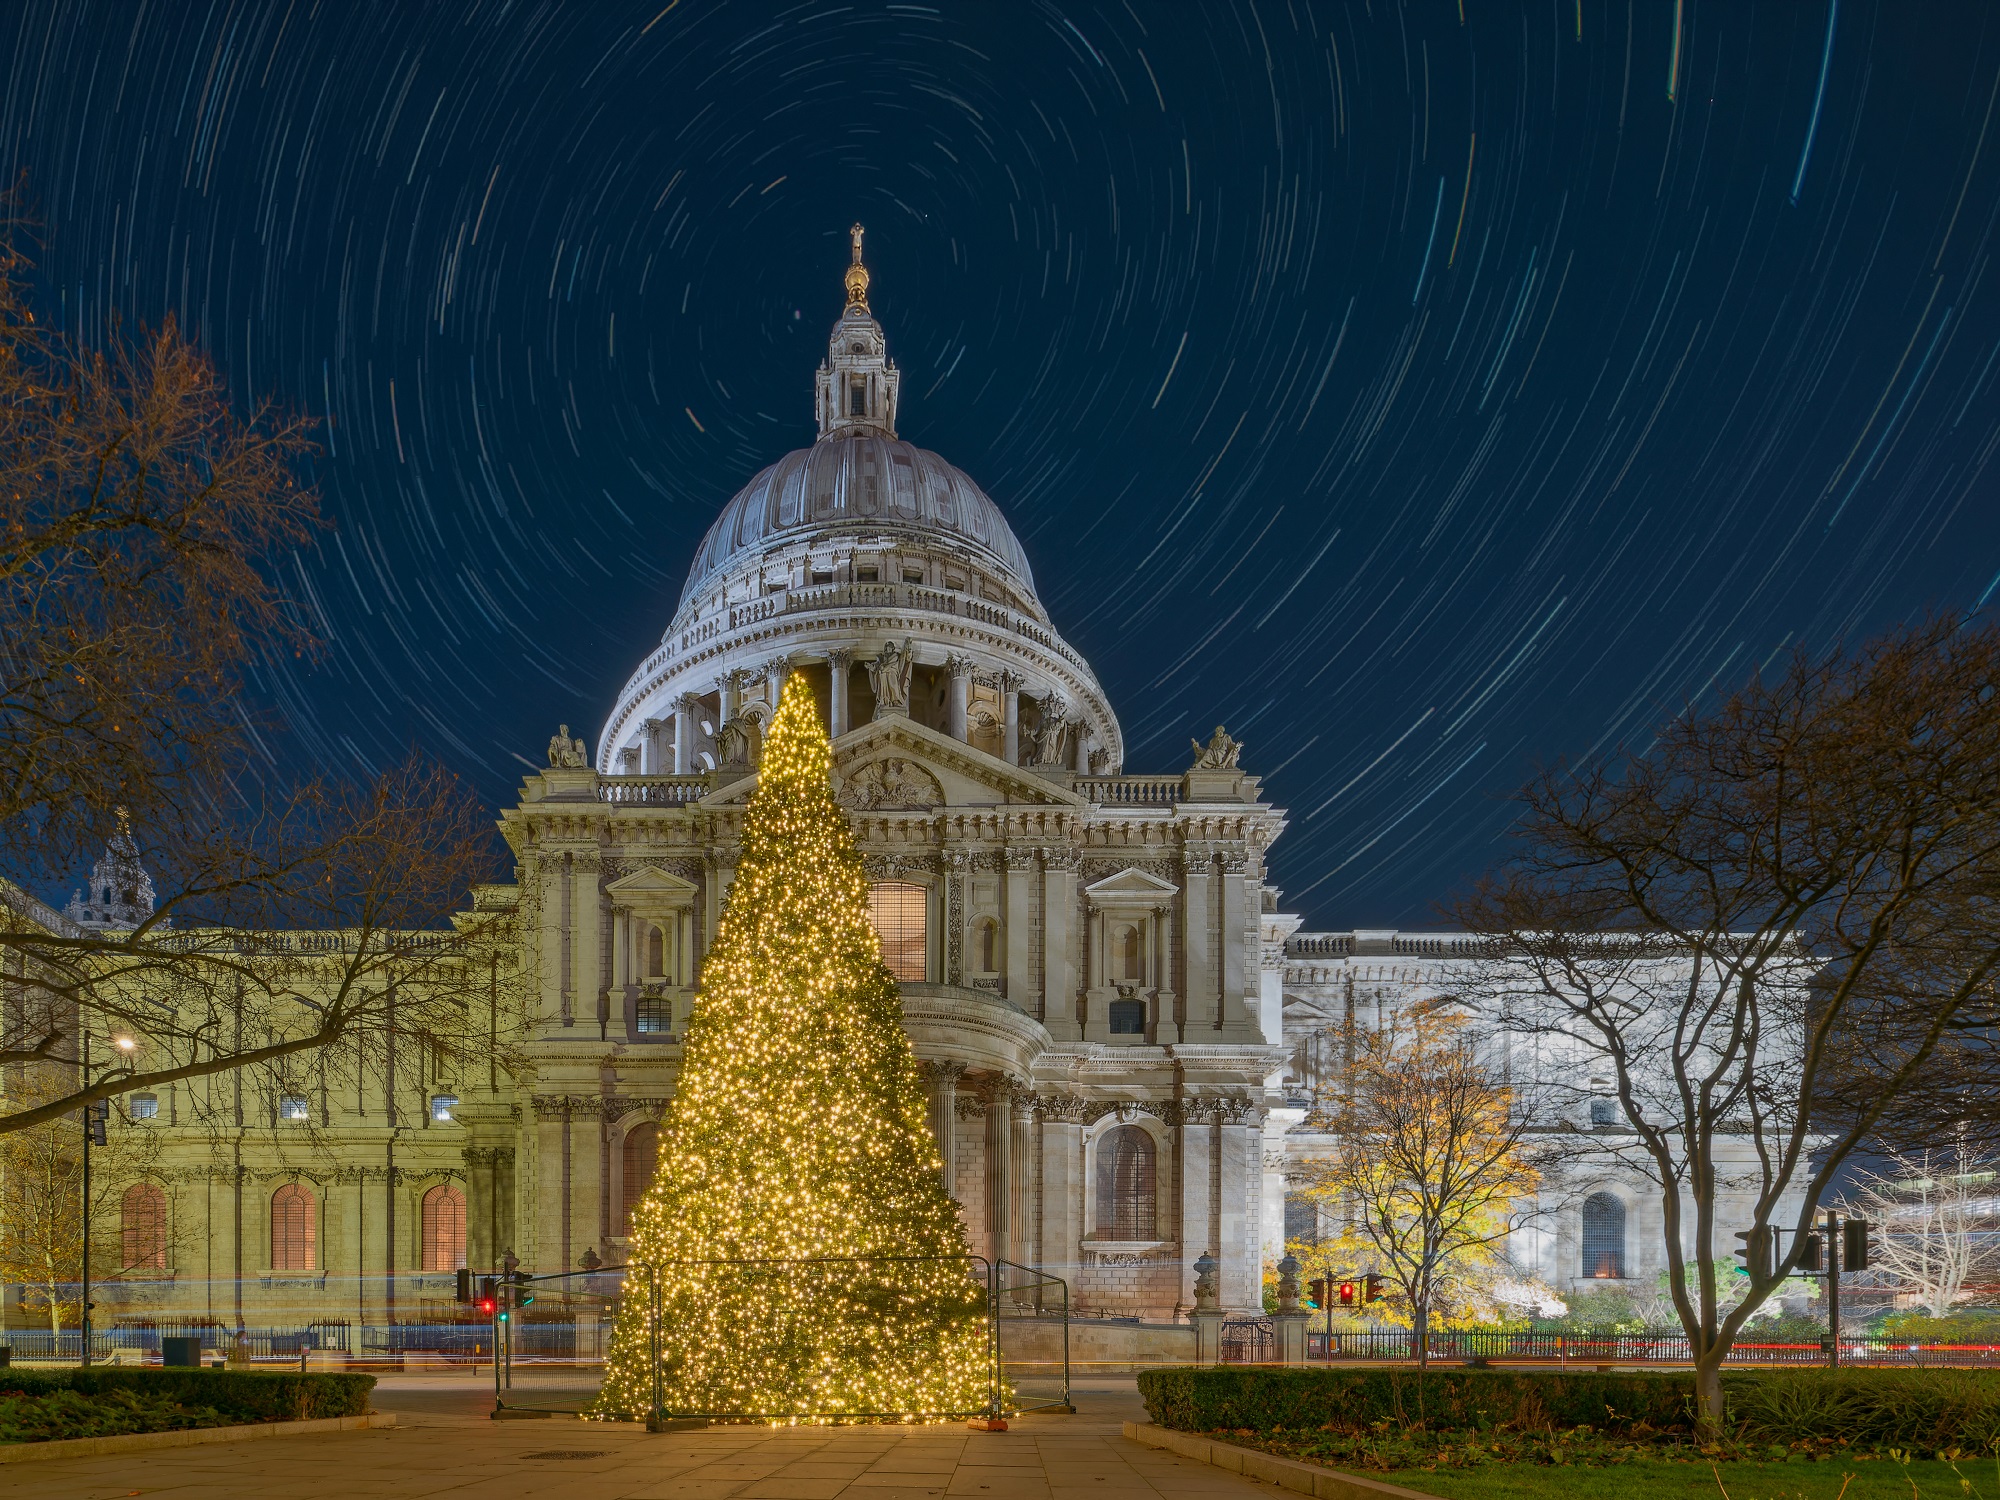 St Paul’s Cathedral hosts special services to celebrate Christmas with